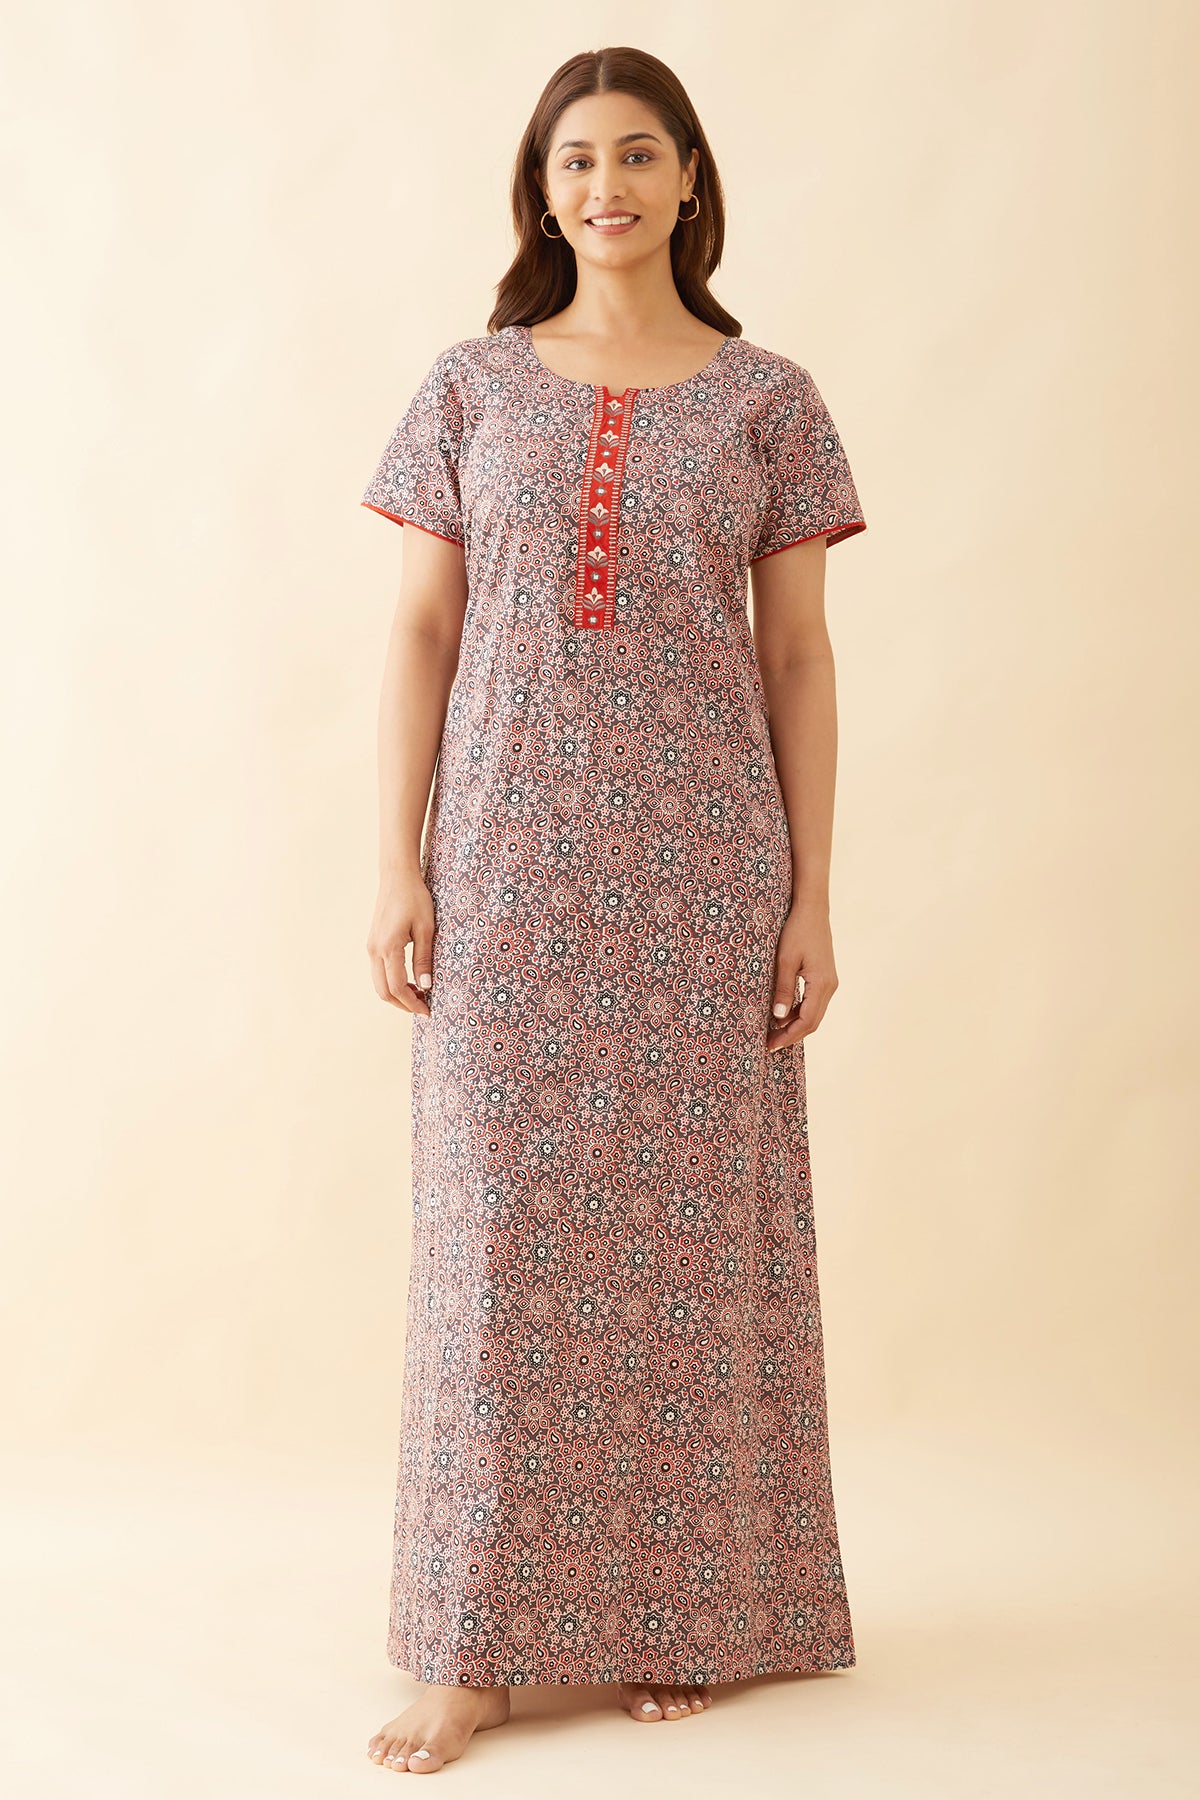 Allover Paisley Printed With Floral Embroidered Yoke Nighty - Orange